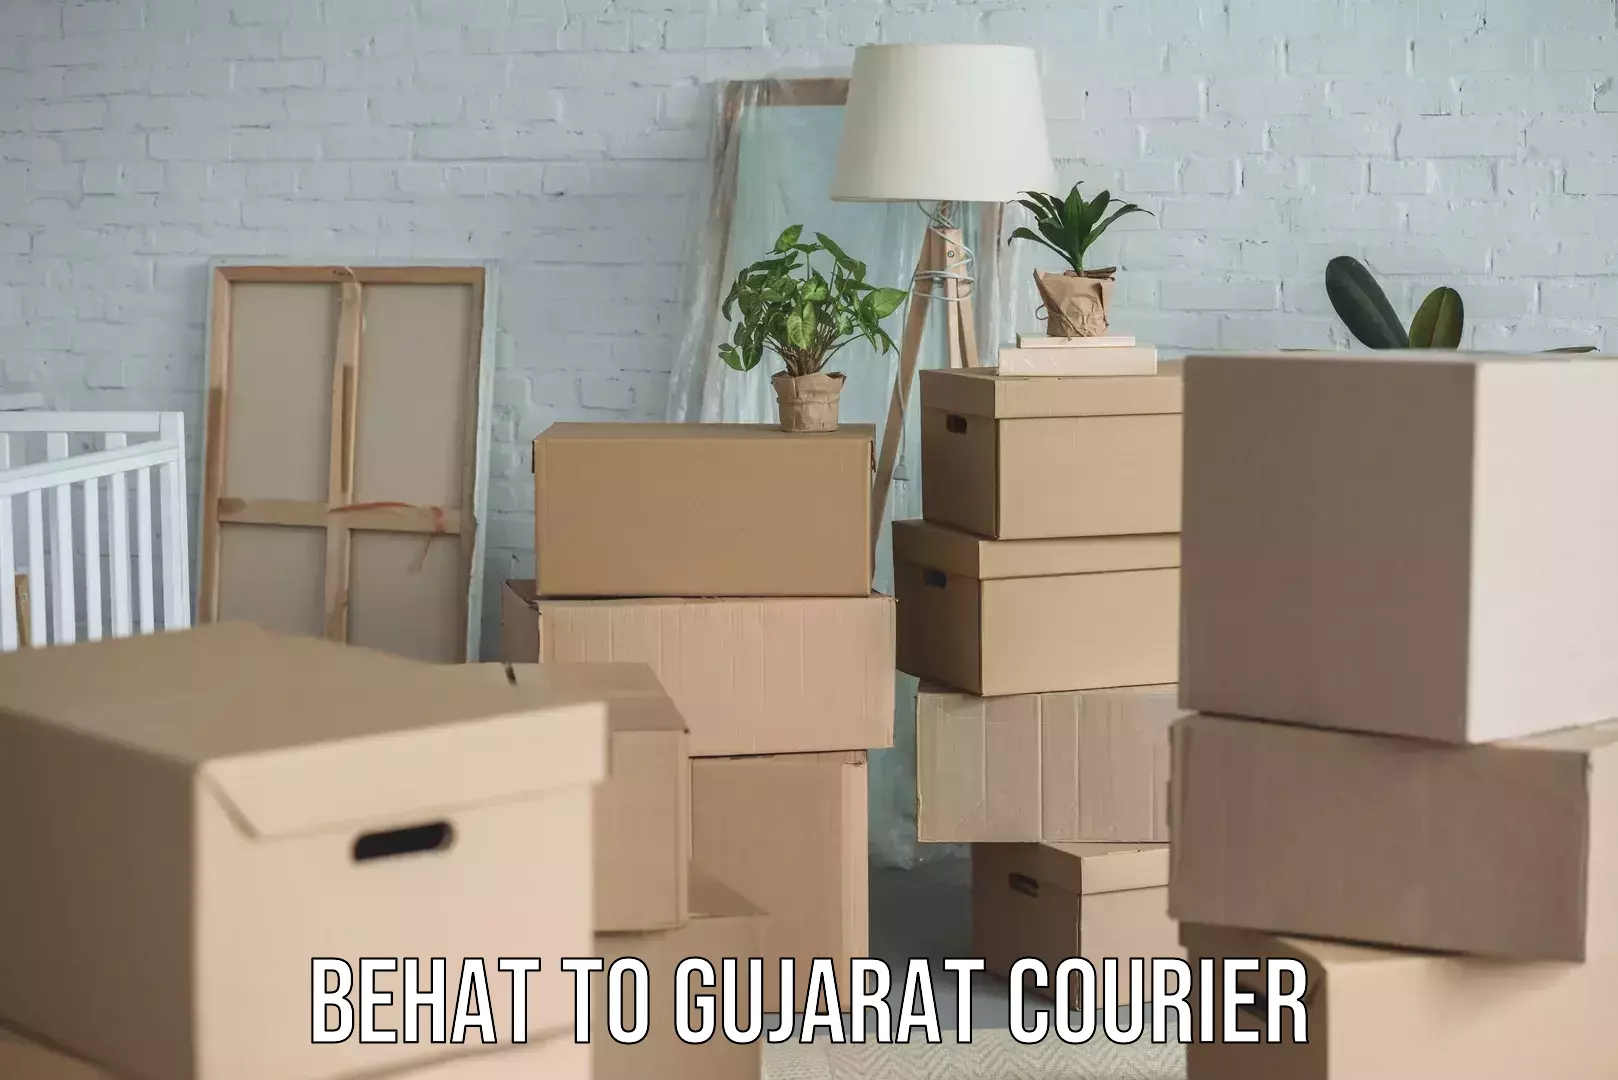 Courier service innovation Behat to Gujarat